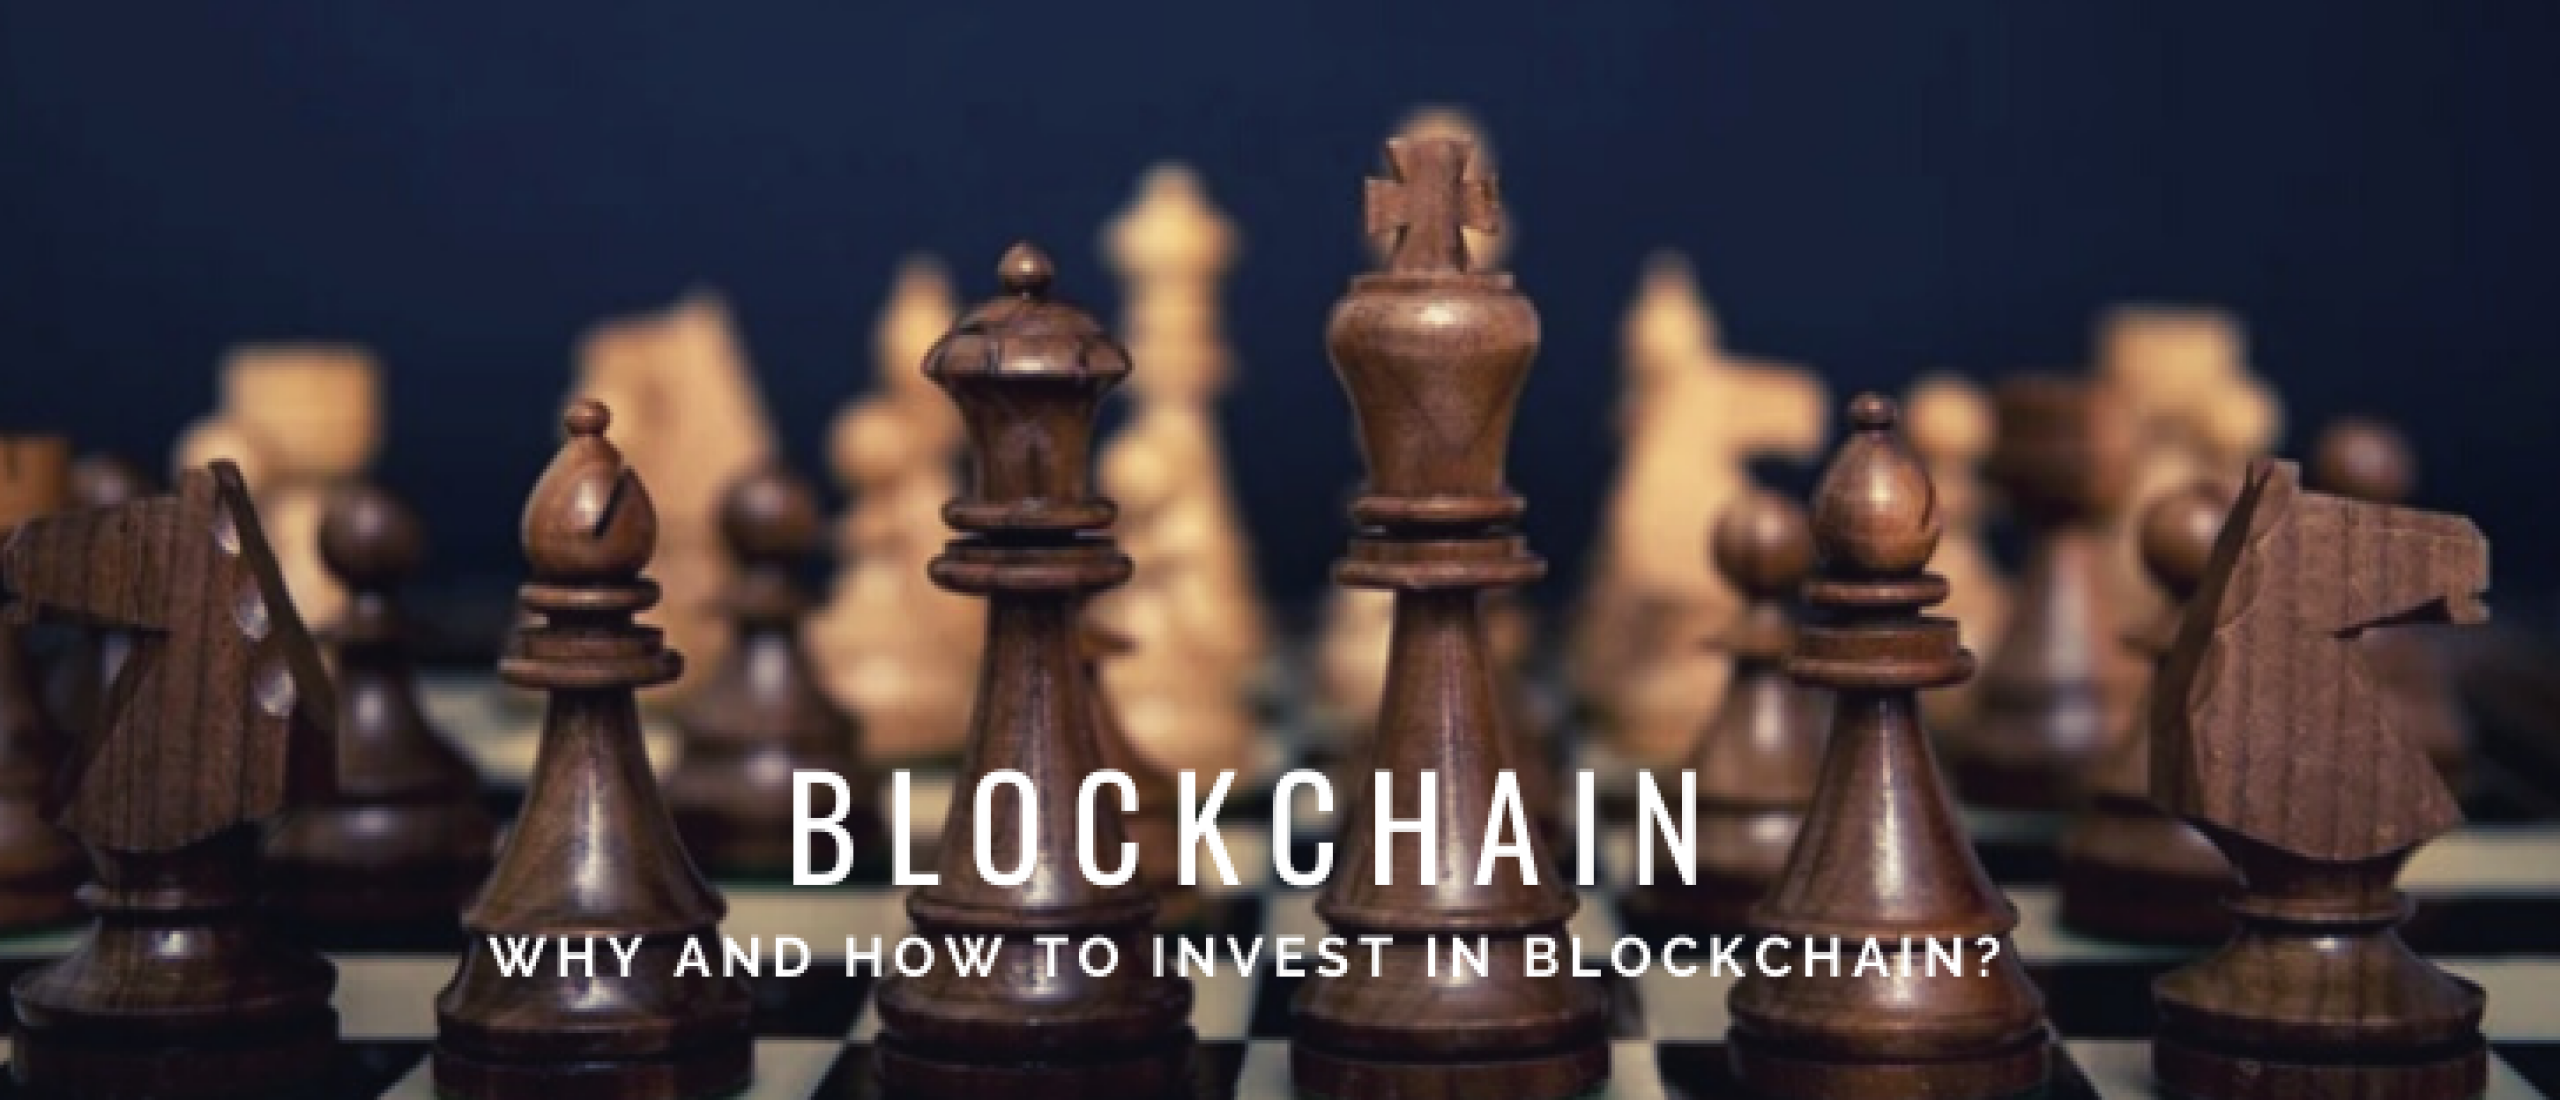 Invest in Blockchain: Why, How and What?